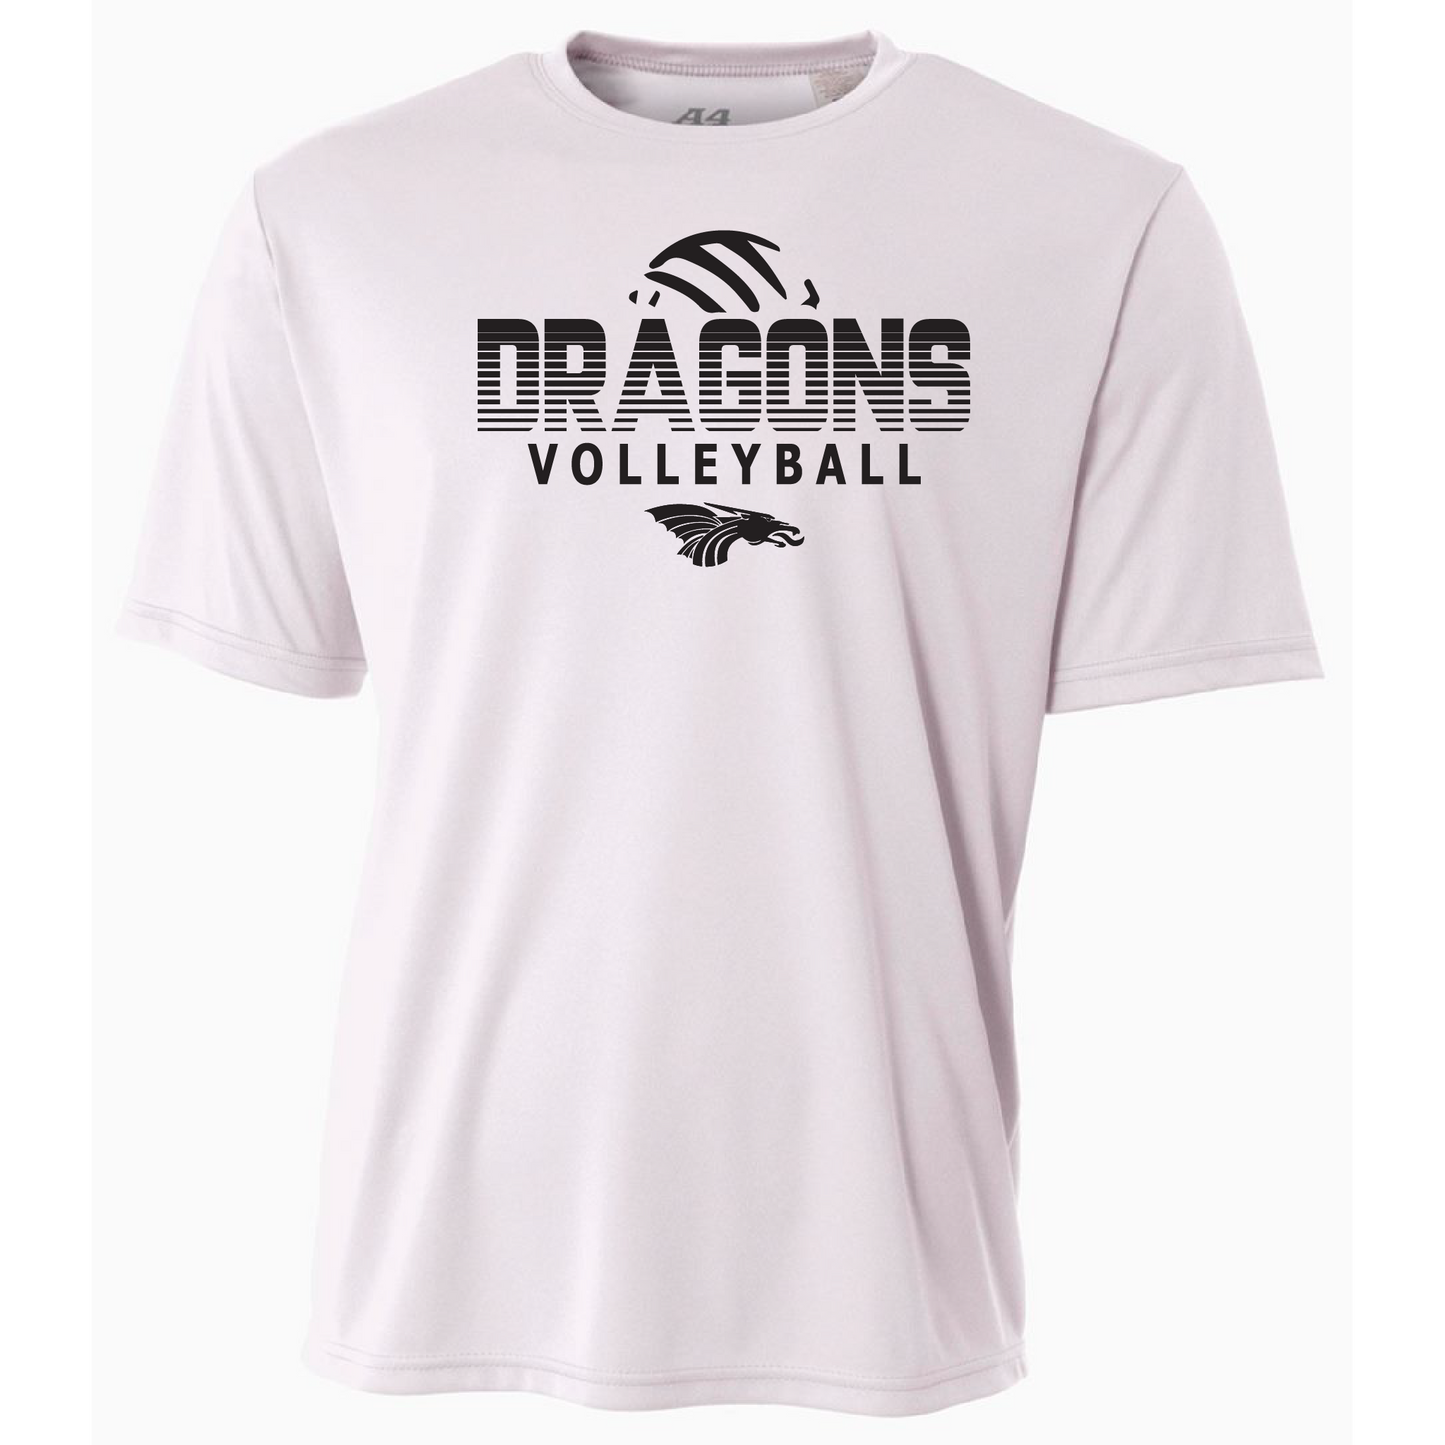 Mens S/S T-Shirt - Dragons Volleyball